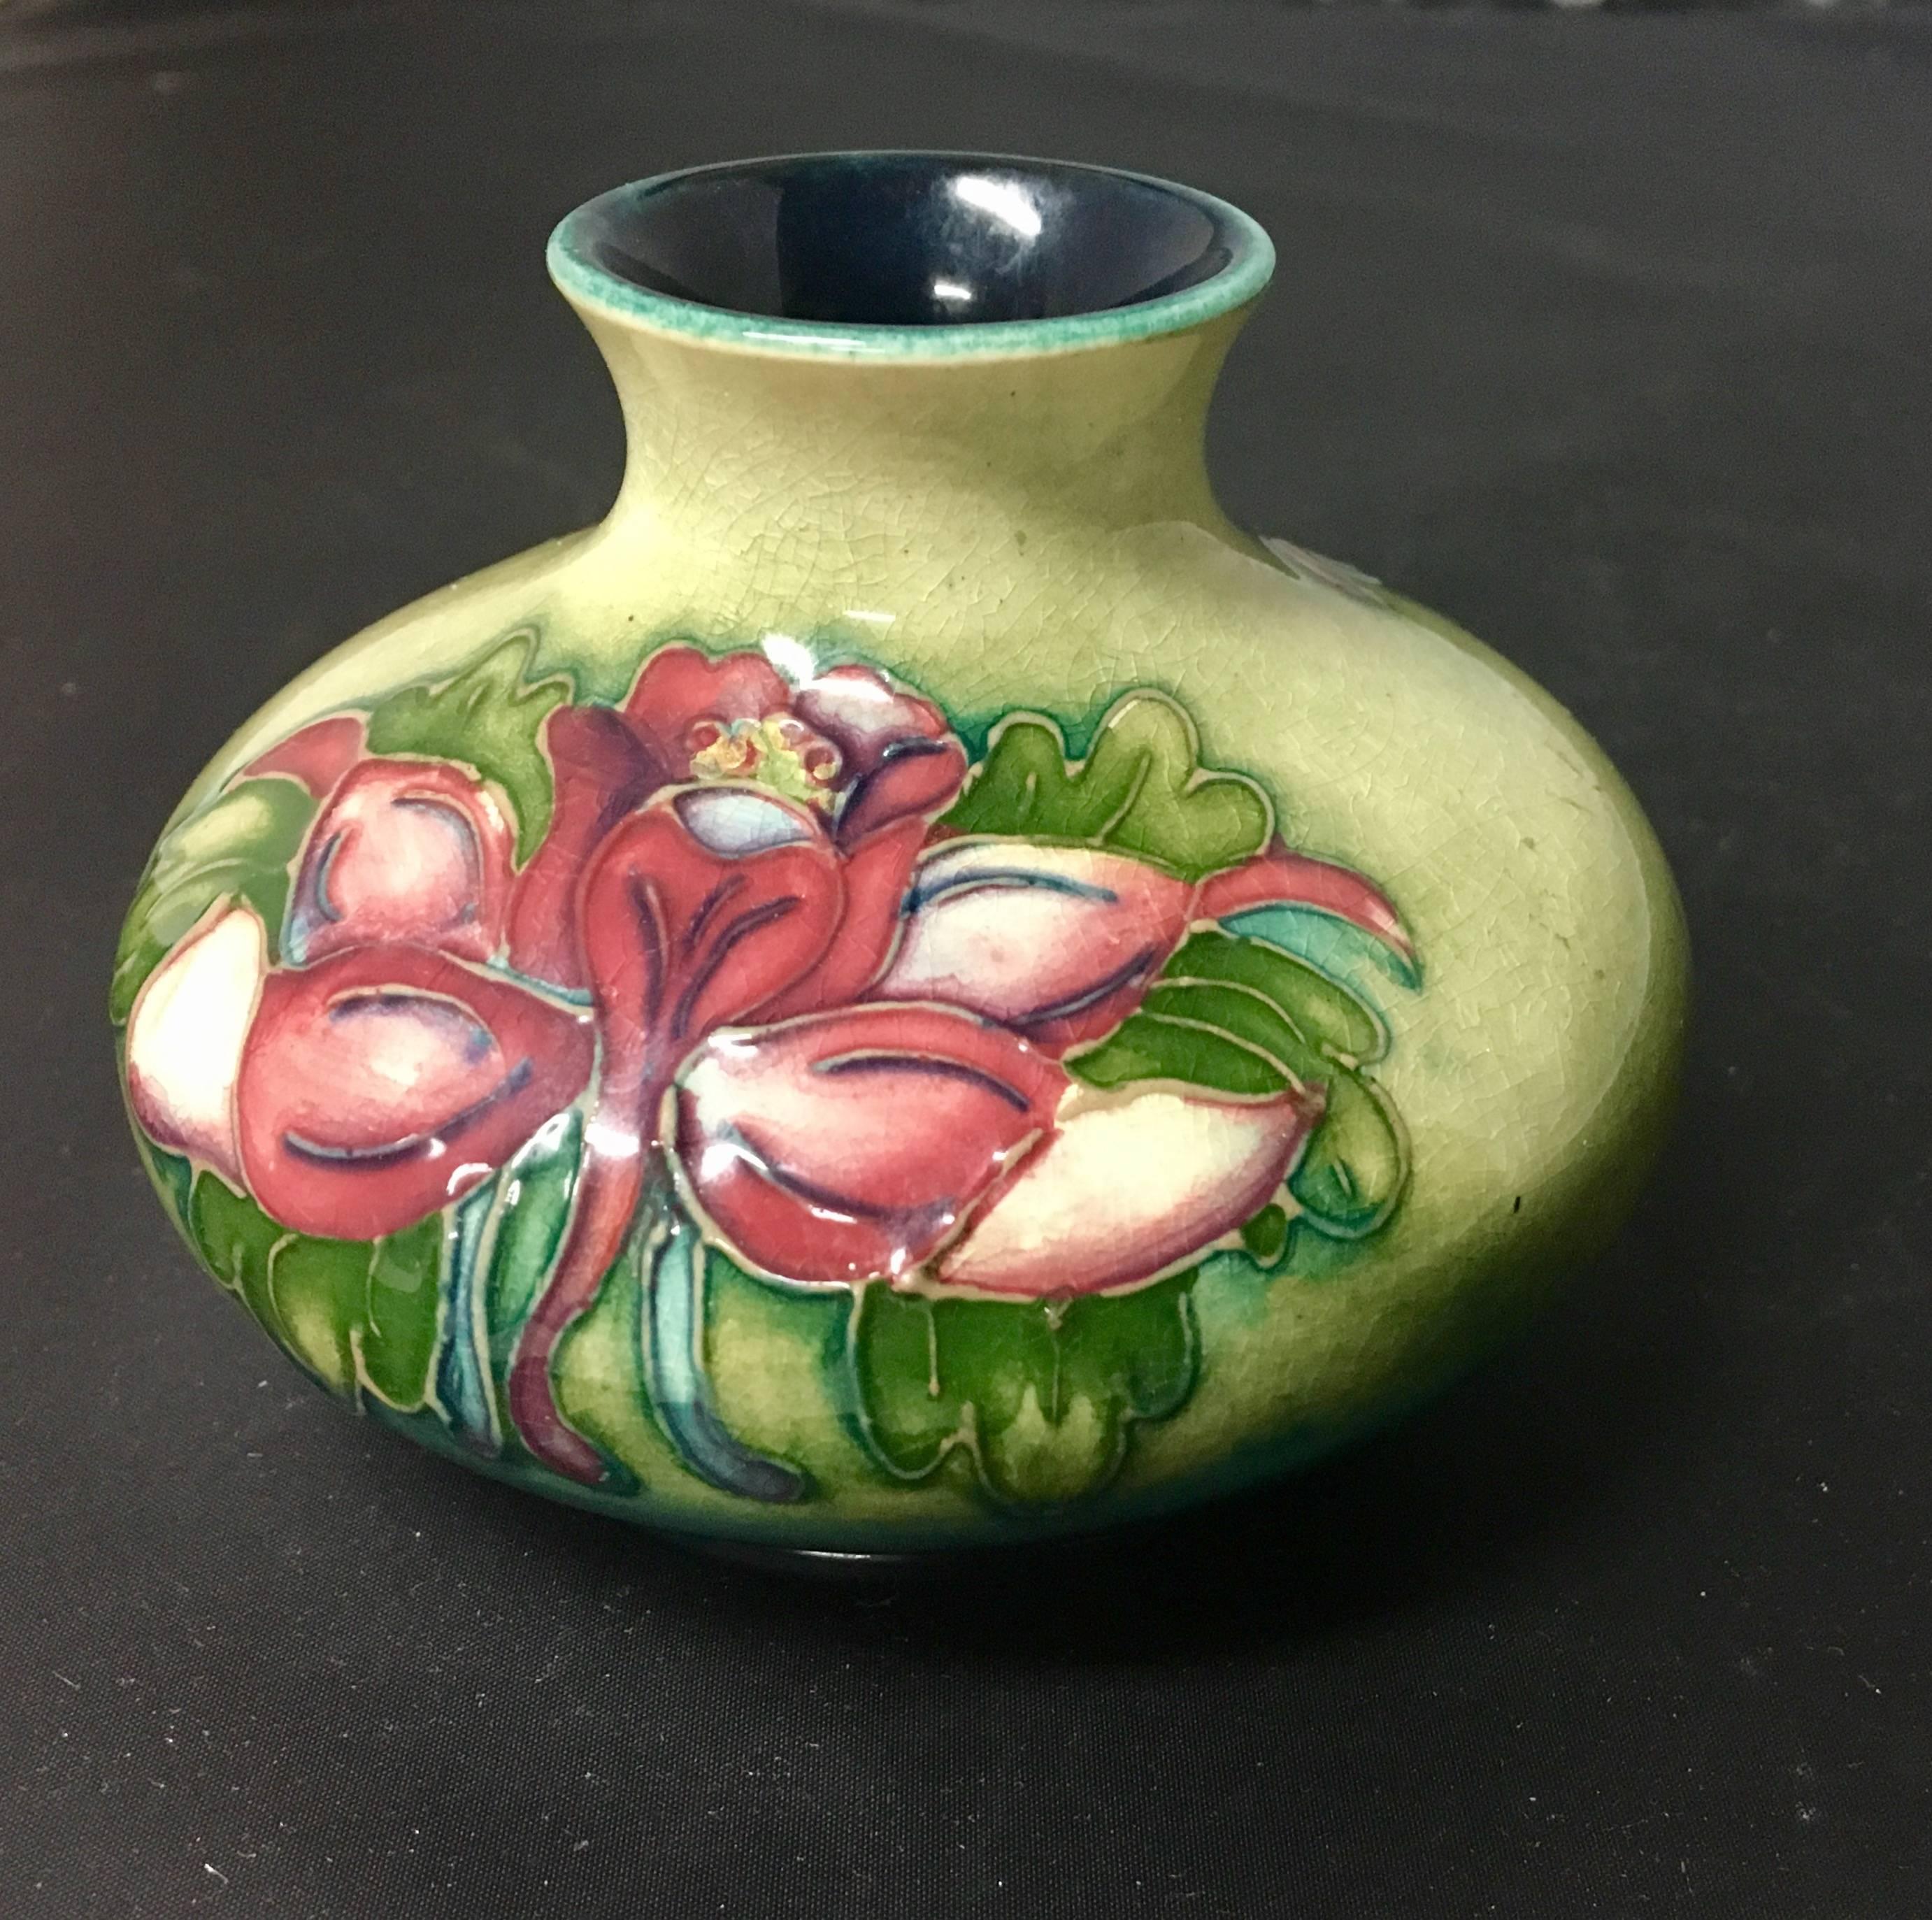 Rare English low art pottery vase by William Moorcraft, circa 1930s. The piece is signed and also has the designation 